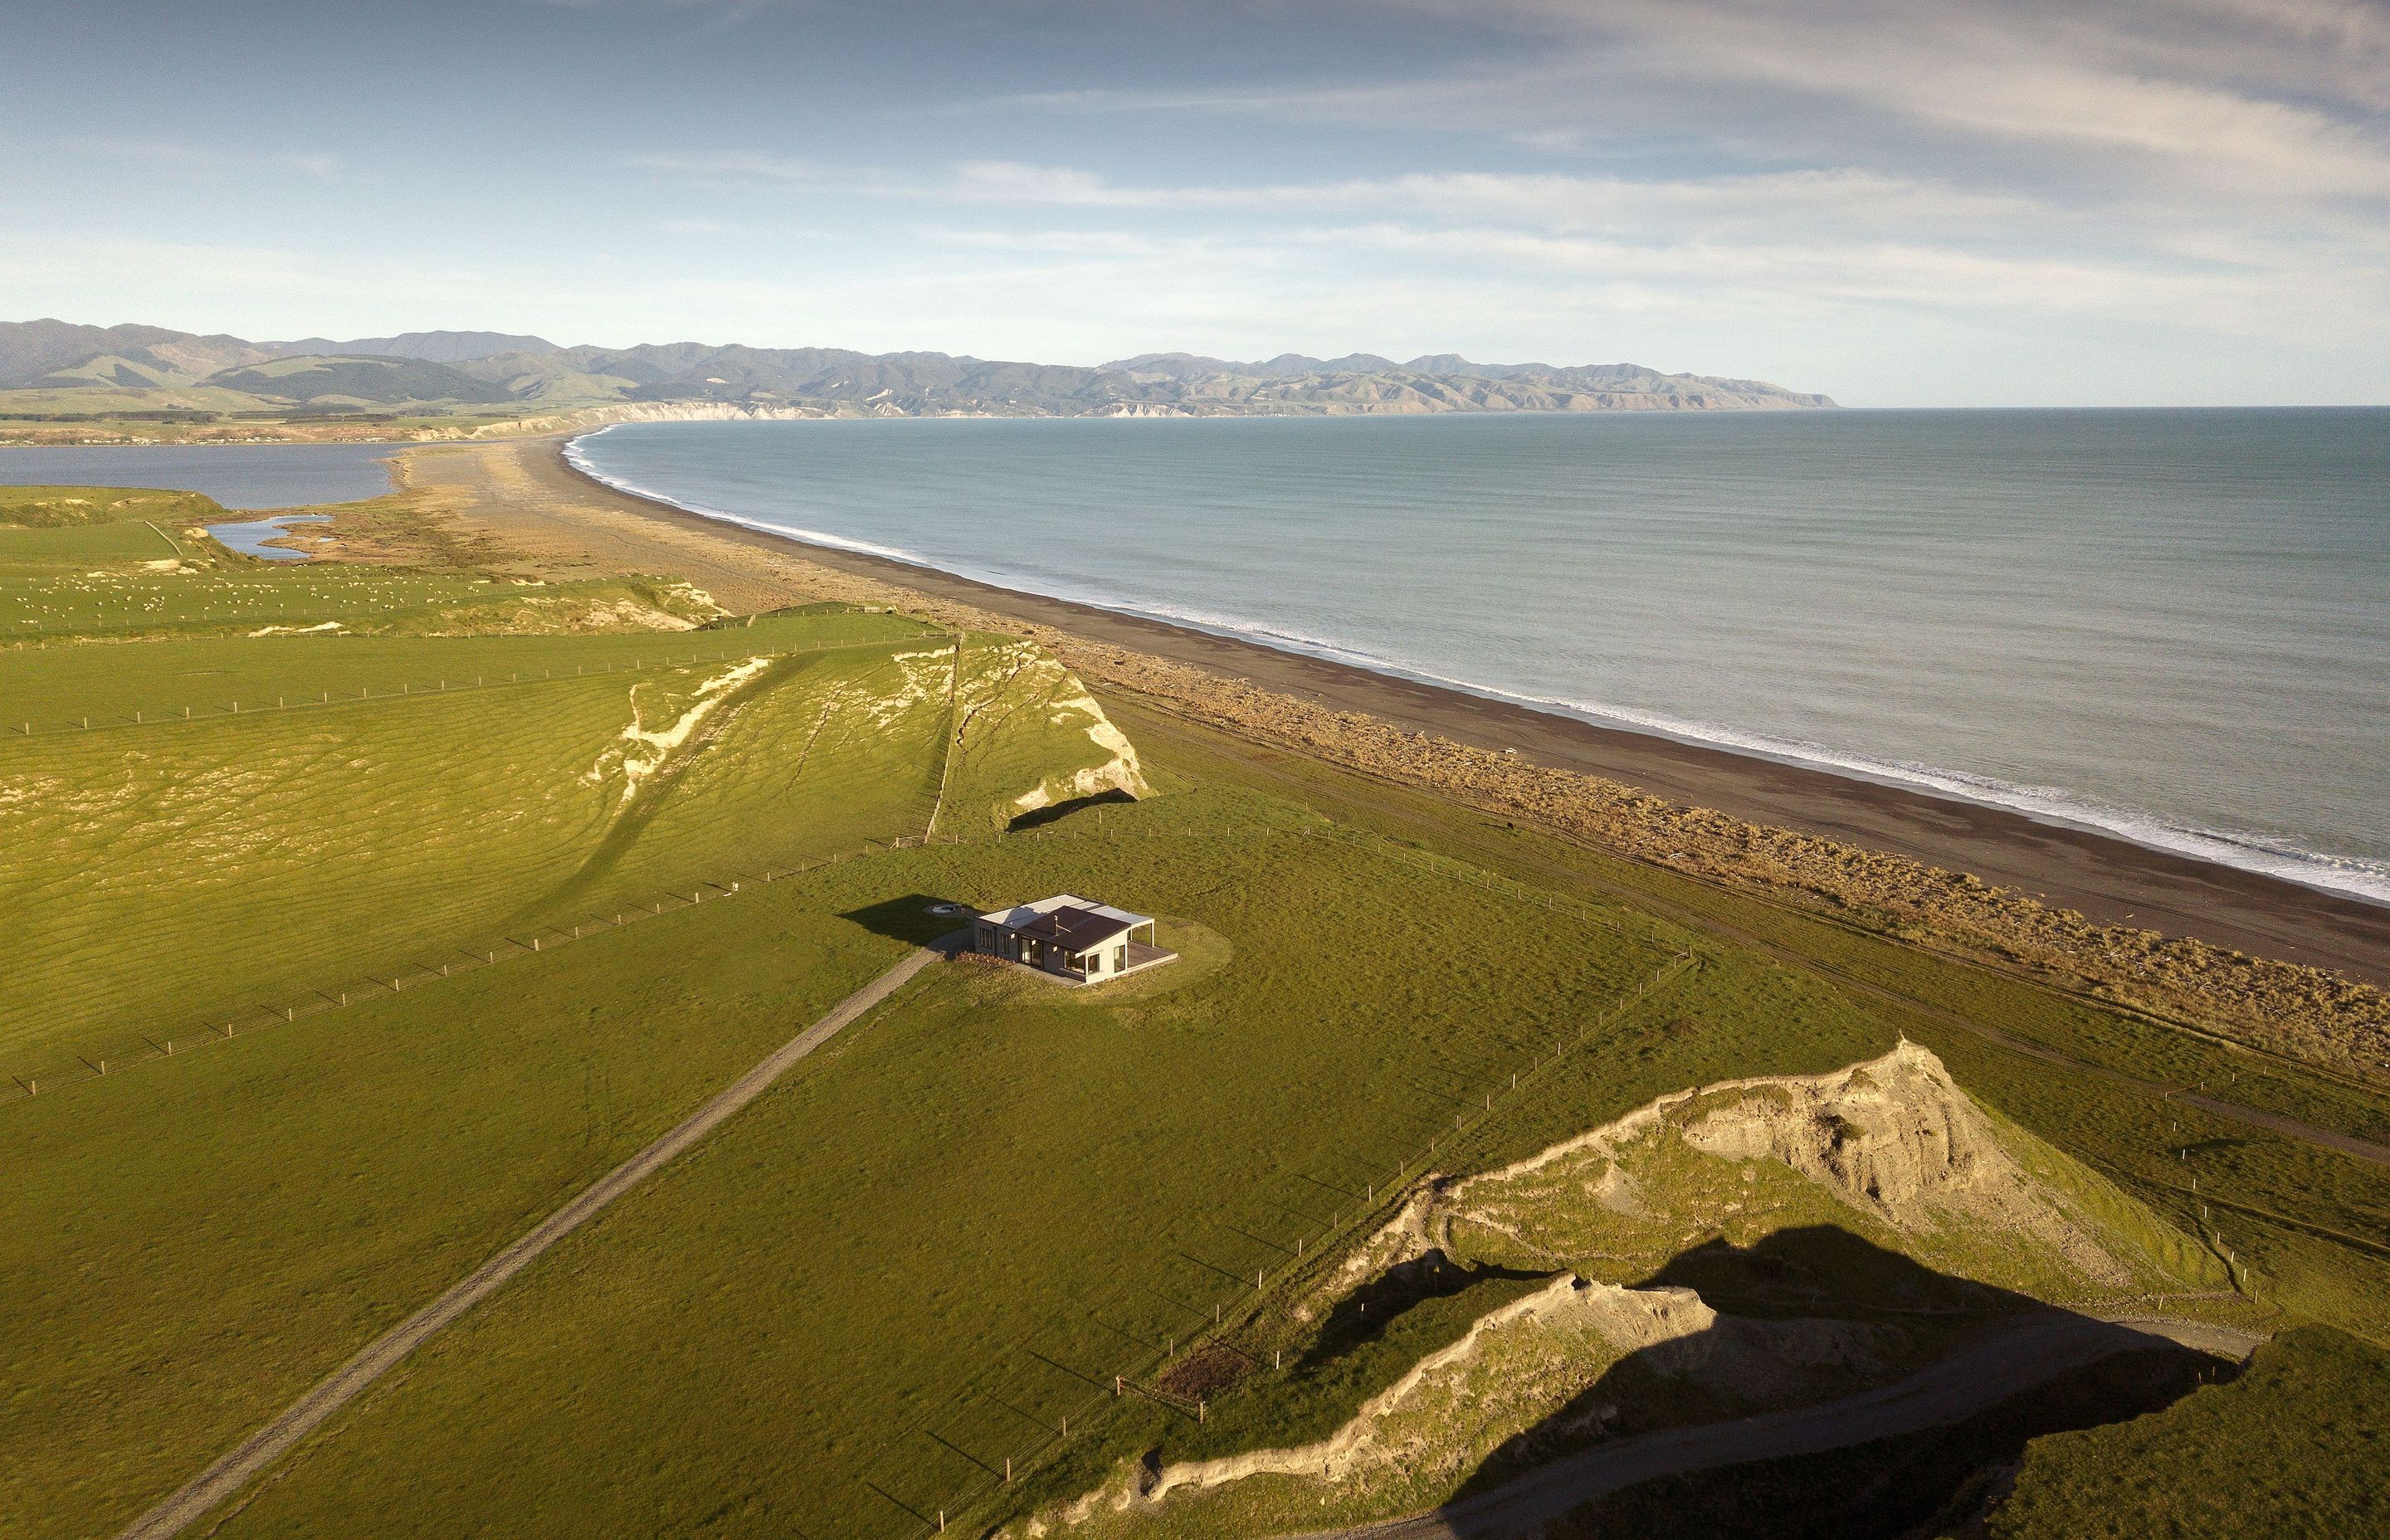 The owners of this Wairarapa farm wanted a place to retreat to so they could enjoy the solitude this remote and exposed site afforded.